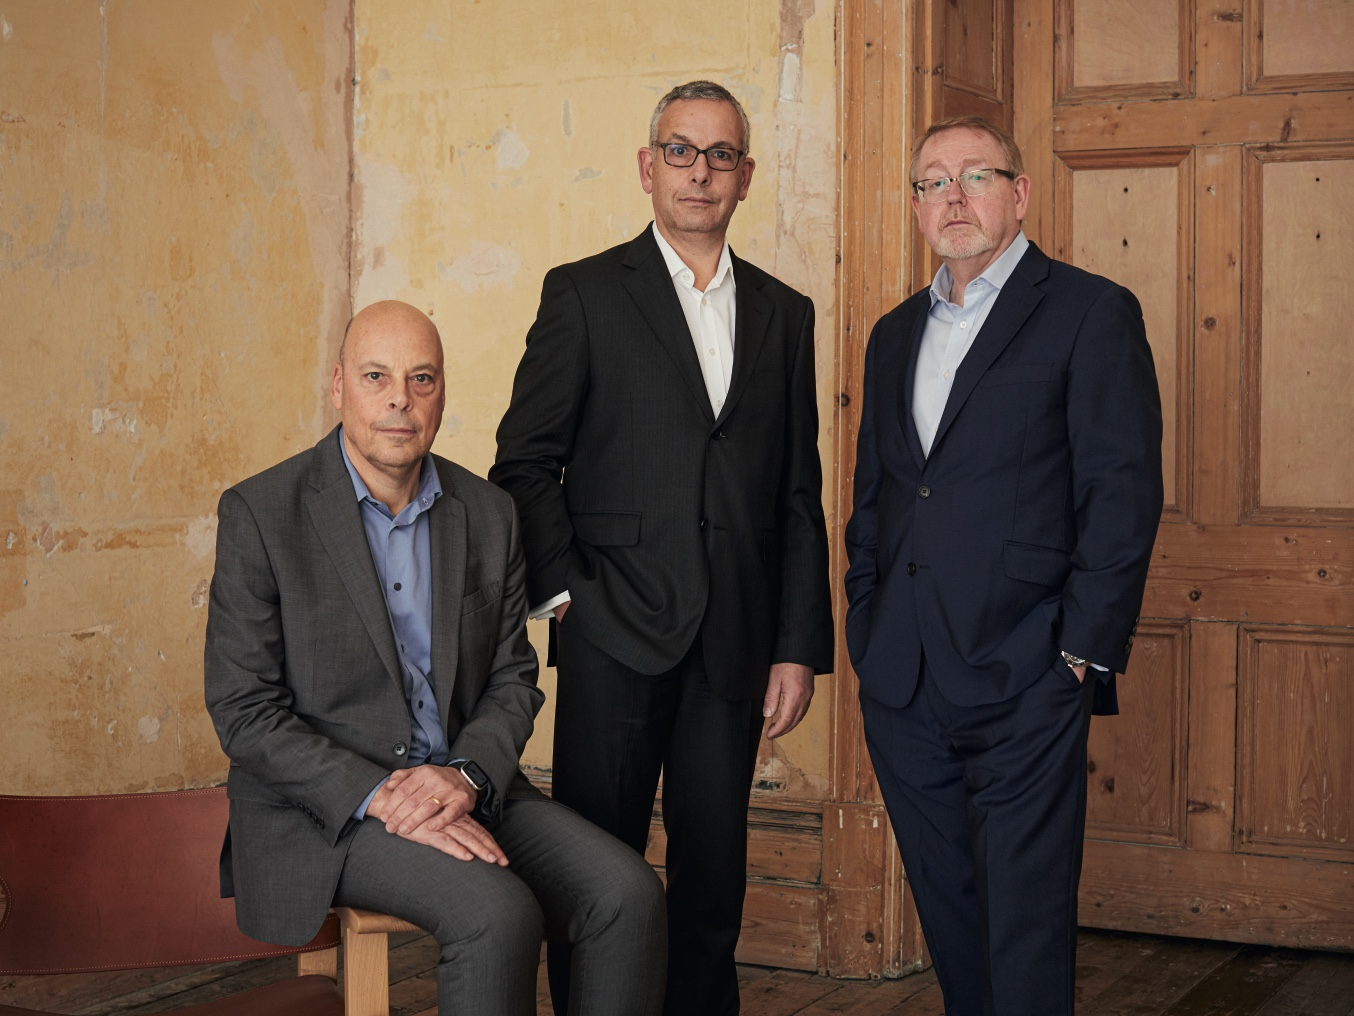 Steven Bernstein, Stephen Massias and Lawrence Kelly